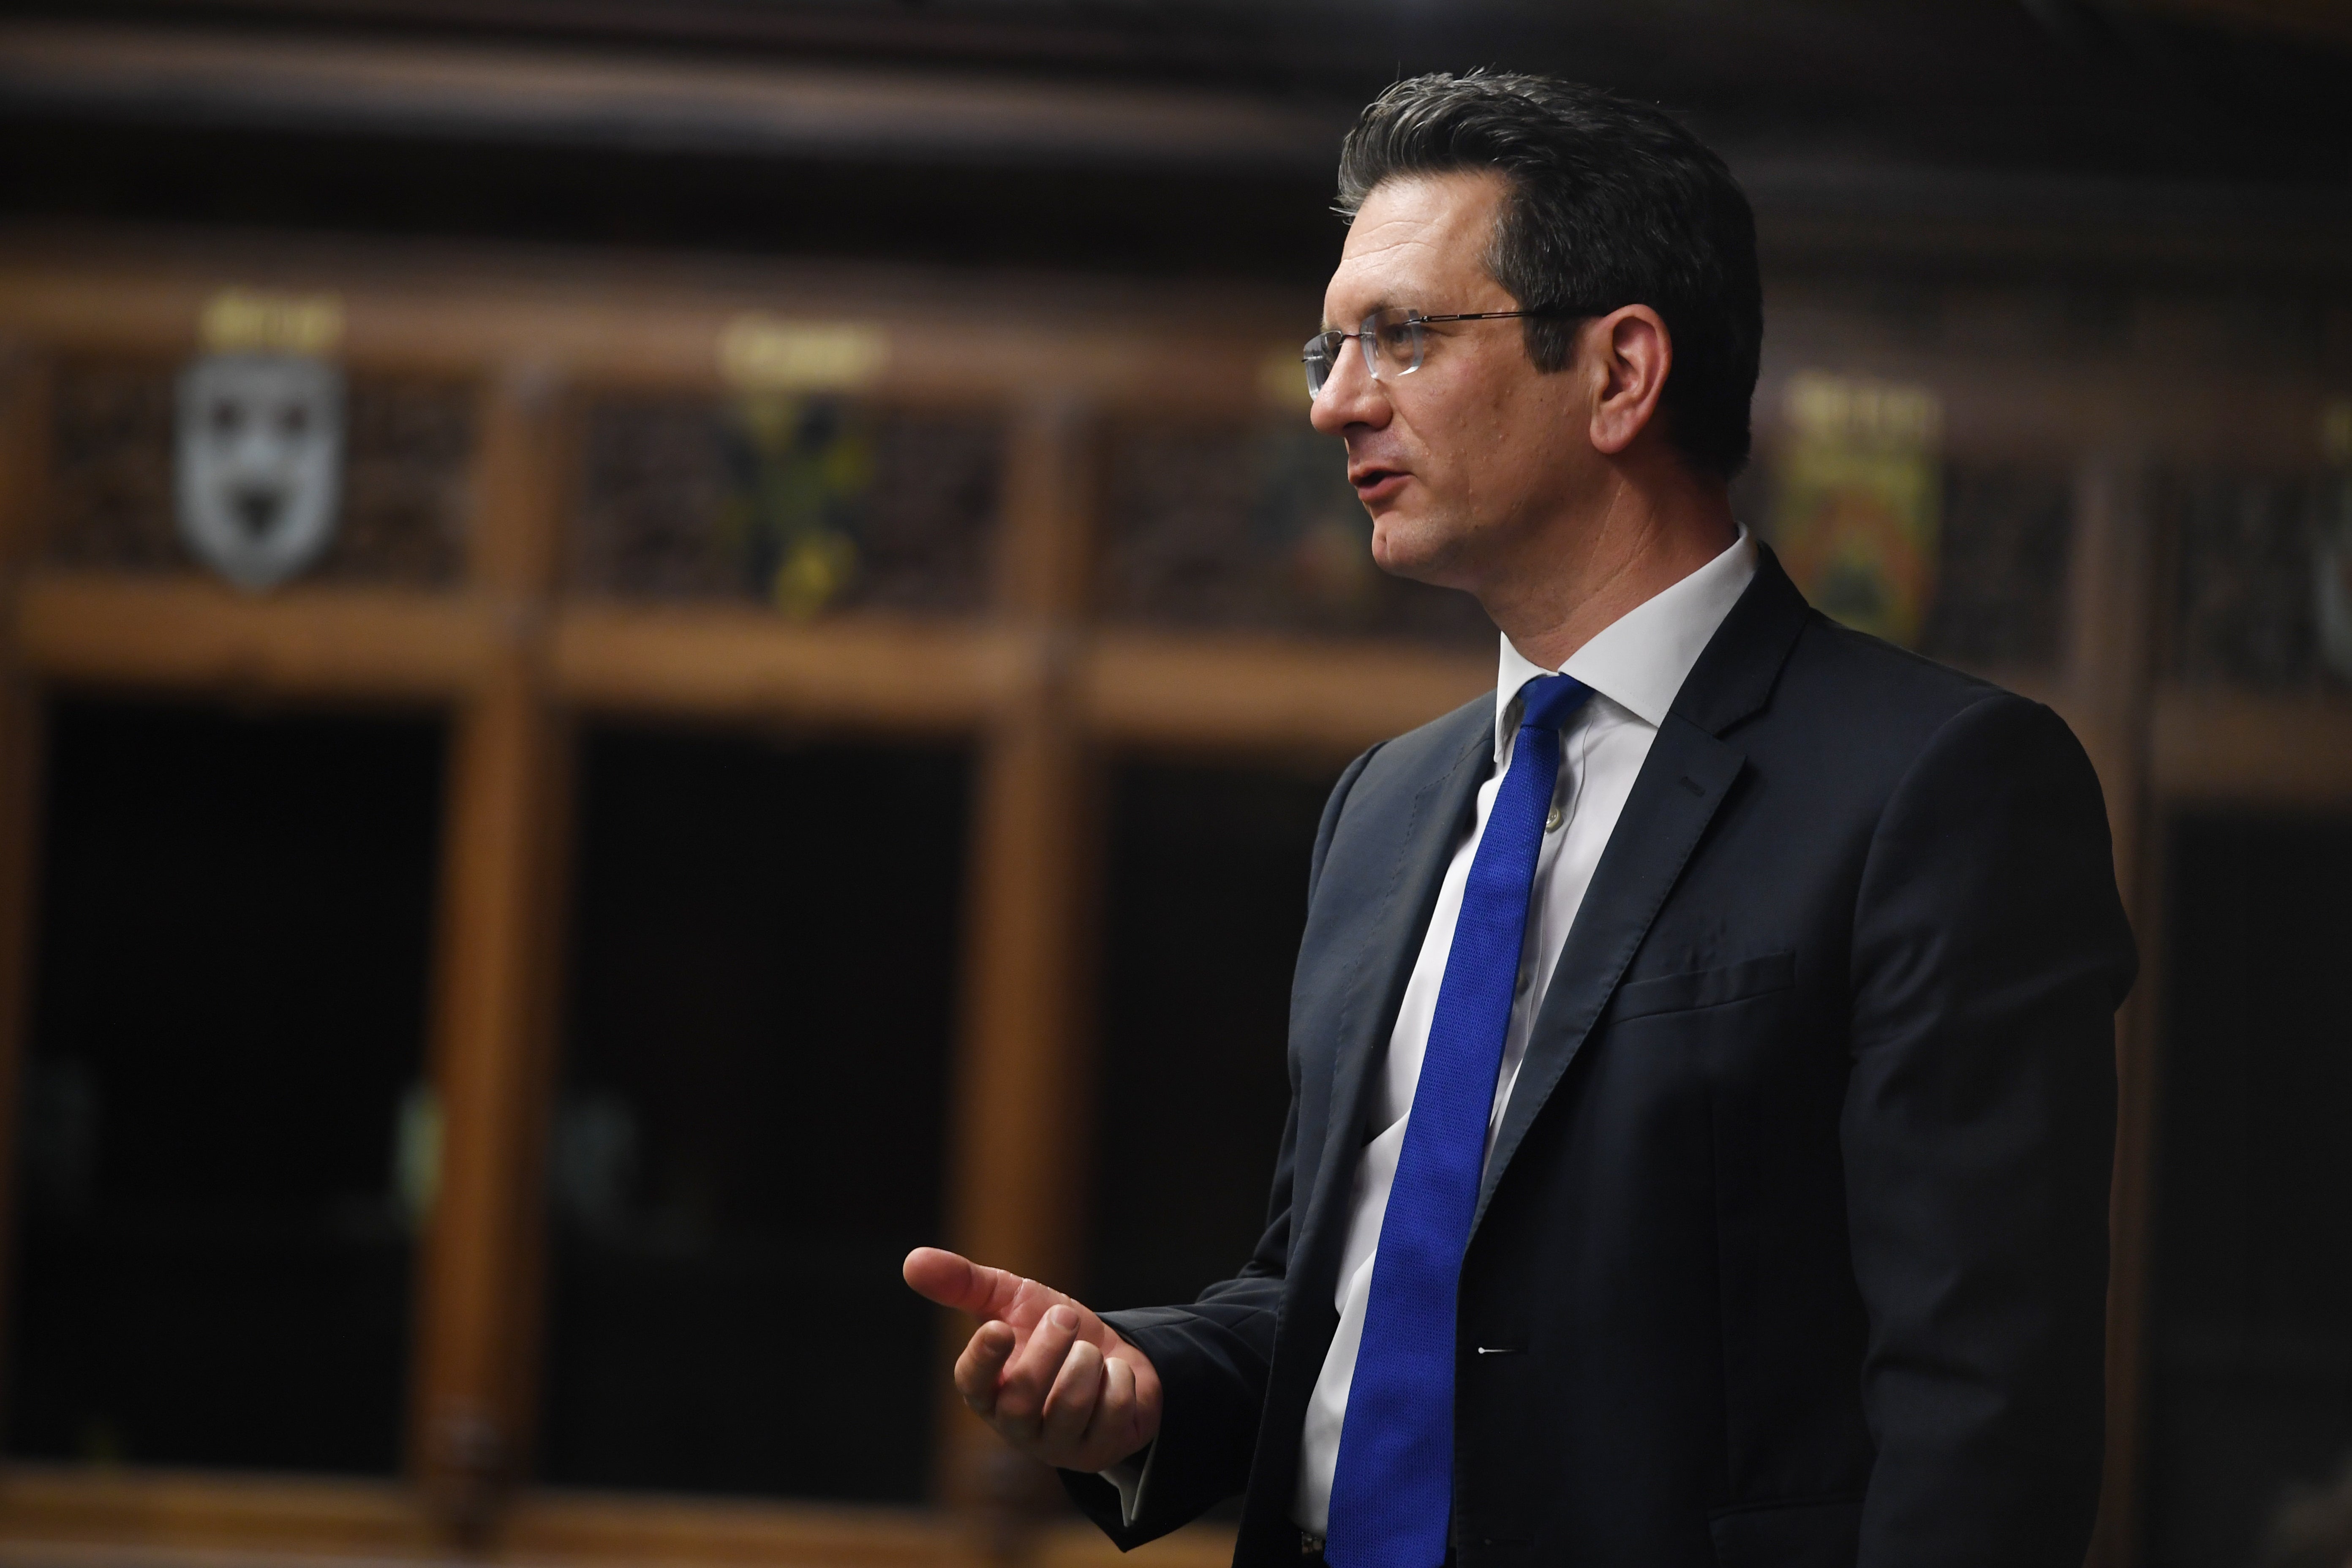 Steve Baker has warned Boris Johnson partygate could hurt the Tories at the polls (UK Parliament/Jessica Taylor/PA)